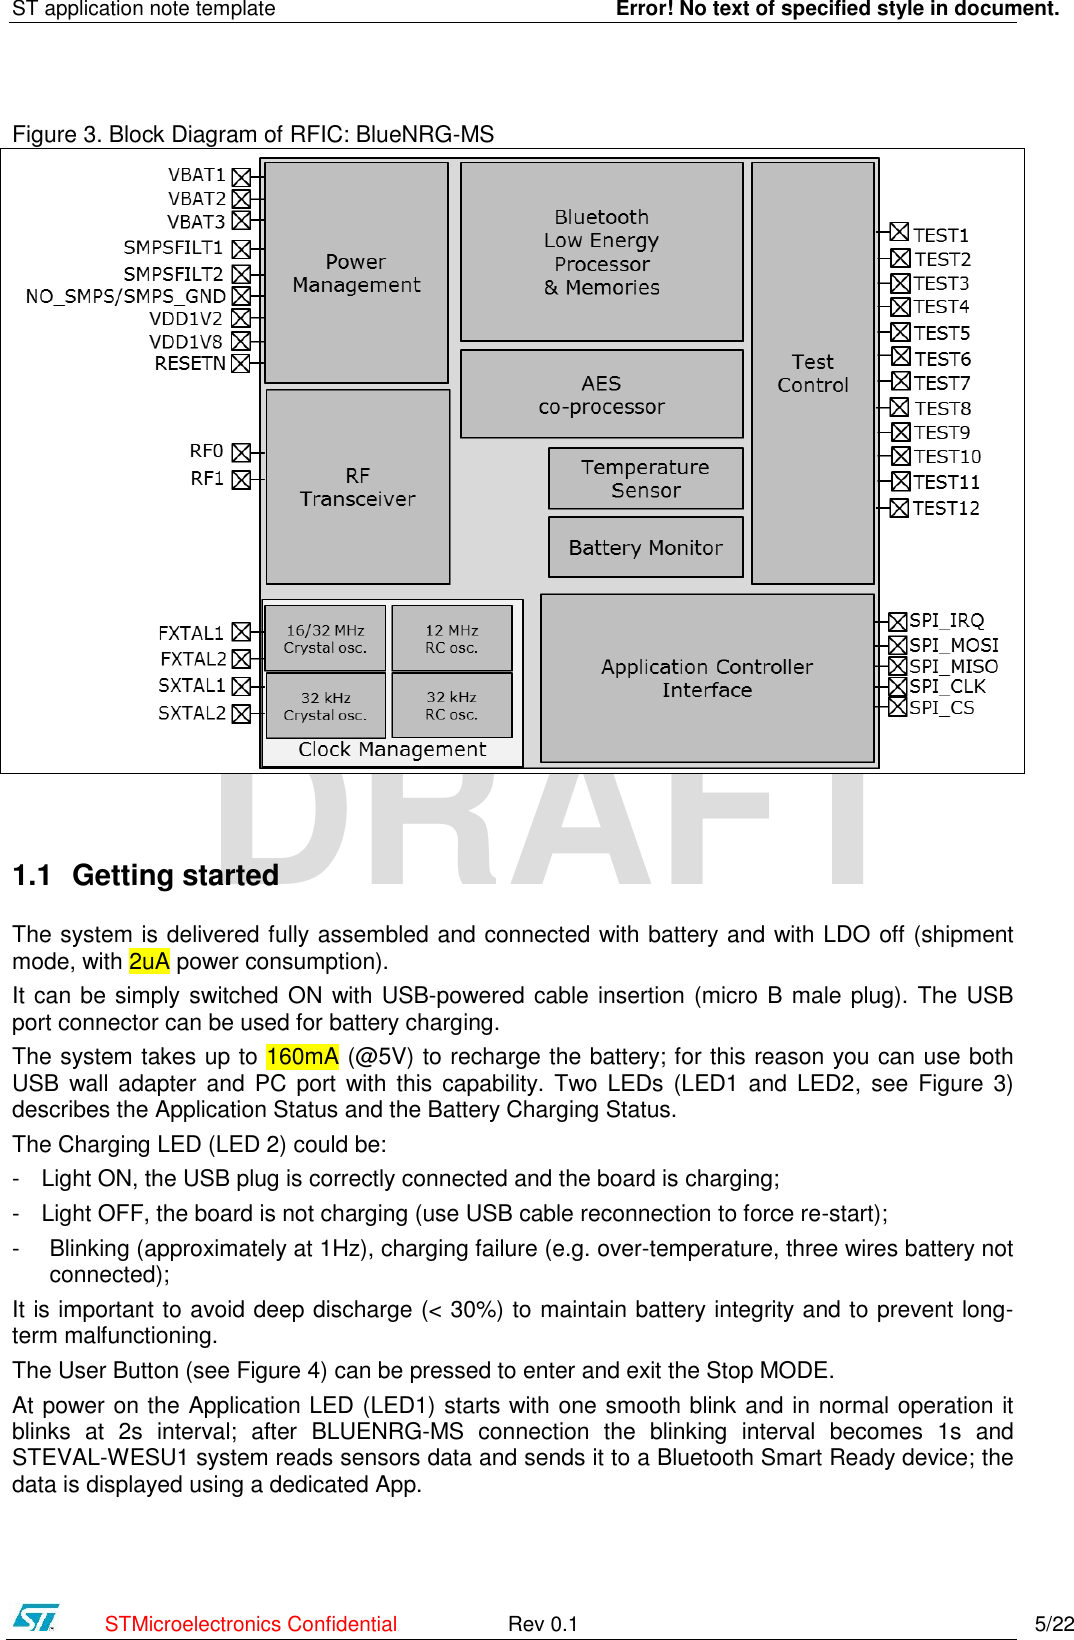 ST application note template    Error! No text of specified style in document.    STMicroelectronics Confidential  Rev 0.1    5/22 DRAFT Figure 3. Block Diagram of RFIC: BlueNRG-MS   1.1 Getting started The system is delivered fully assembled and connected with battery and with LDO off (shipment mode, with 2uA power consumption).  It can be simply switched ON with USB-powered cable insertion (micro B male plug). The USB port connector can be used for battery charging.  The system takes up to 160mA (@5V) to recharge the battery; for this reason you can use both USB wall adapter  and  PC port  with this  capability. Two LEDs  (LED1 and  LED2,  see  Figure  3) describes the Application Status and the Battery Charging Status.  The Charging LED (LED 2) could be: - Light ON, the USB plug is correctly connected and the board is charging; - Light OFF, the board is not charging (use USB cable reconnection to force re-start);  - Blinking (approximately at 1Hz), charging failure (e.g. over-temperature, three wires battery not connected); It is important to avoid deep discharge (&lt; 30%) to maintain battery integrity and to prevent long-term malfunctioning. The User Button (see Figure 4) can be pressed to enter and exit the Stop MODE. At power on the Application LED (LED1) starts with one smooth blink and in normal operation it blinks  at  2s  interval;  after  BLUENRG-MS  connection  the  blinking  interval  becomes  1s  and STEVAL-WESU1 system reads sensors data and sends it to a Bluetooth Smart Ready device; the data is displayed using a dedicated App.  